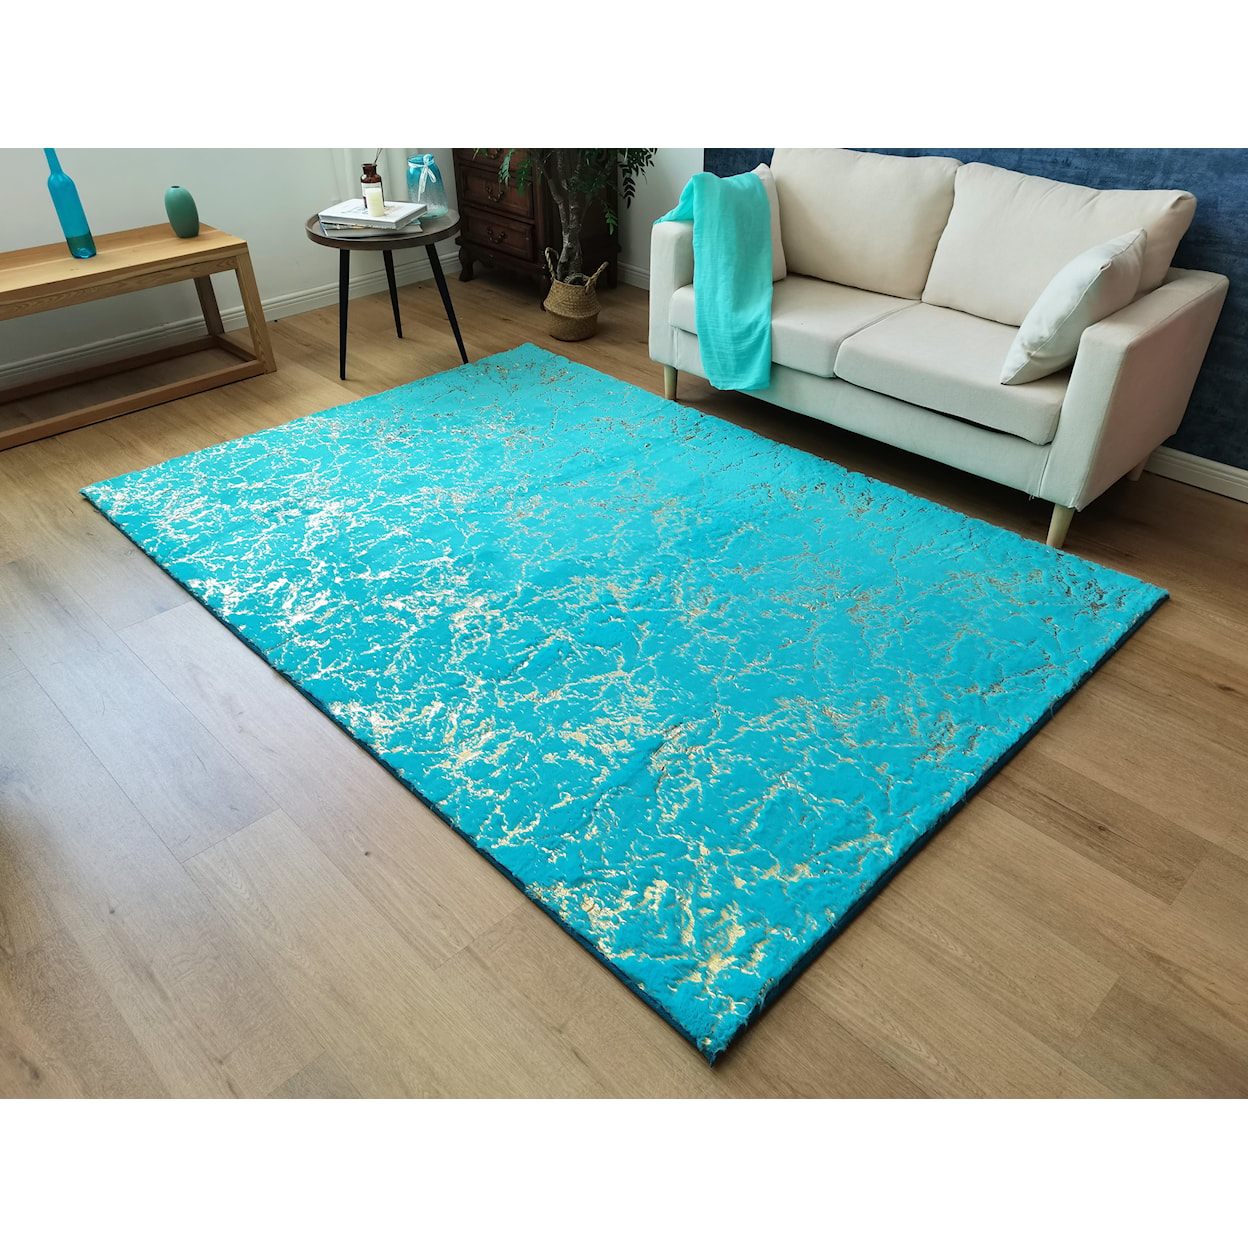 Zinatex Timmy Shaggy S Edition TURQUOISE GOLD 7X10 AREA RUG |